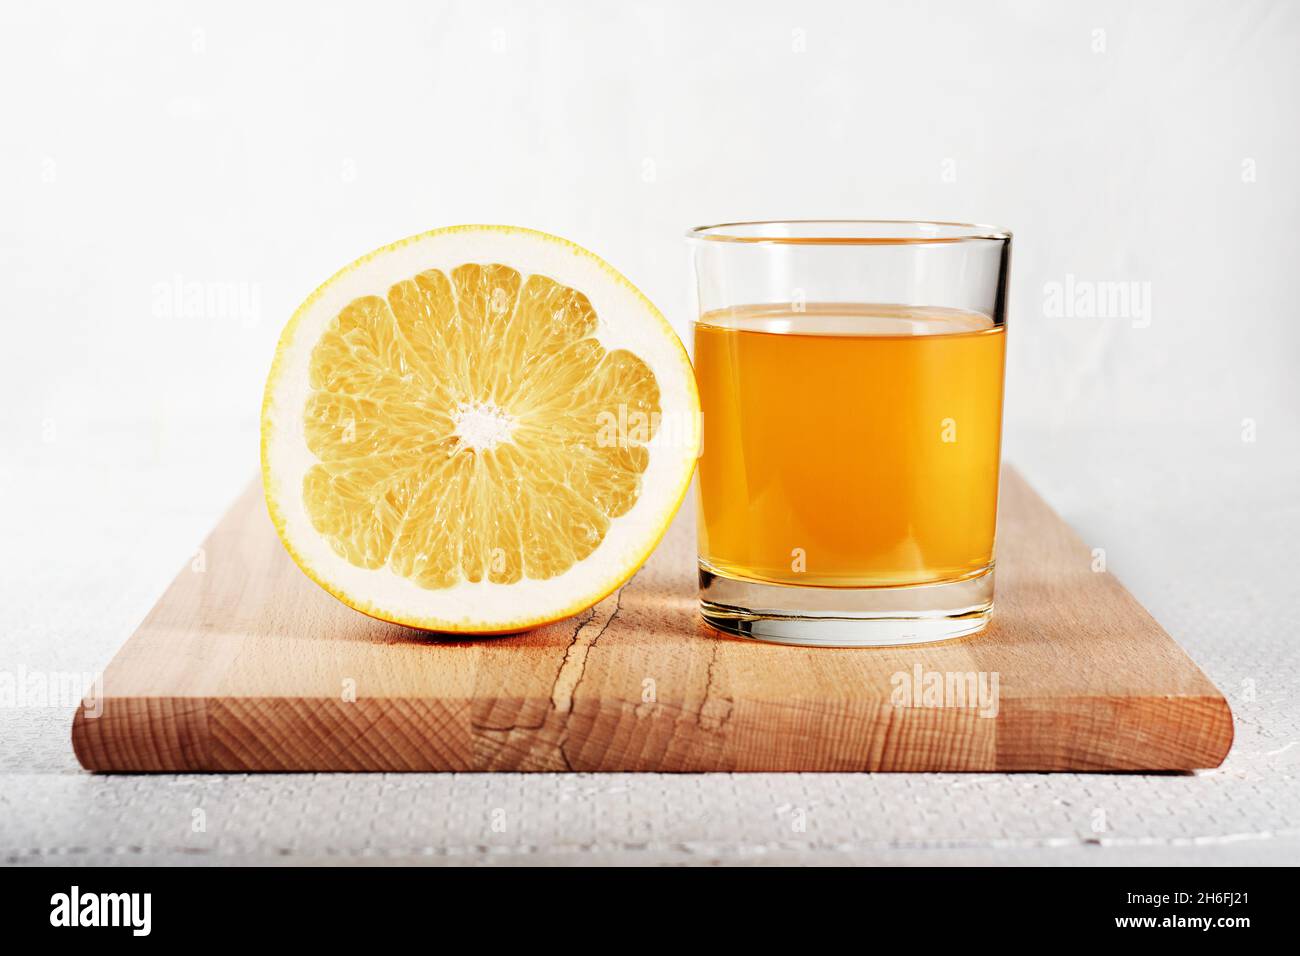 Fresh grapefruit juice in a glass and half a grapefruit. Stock Photo